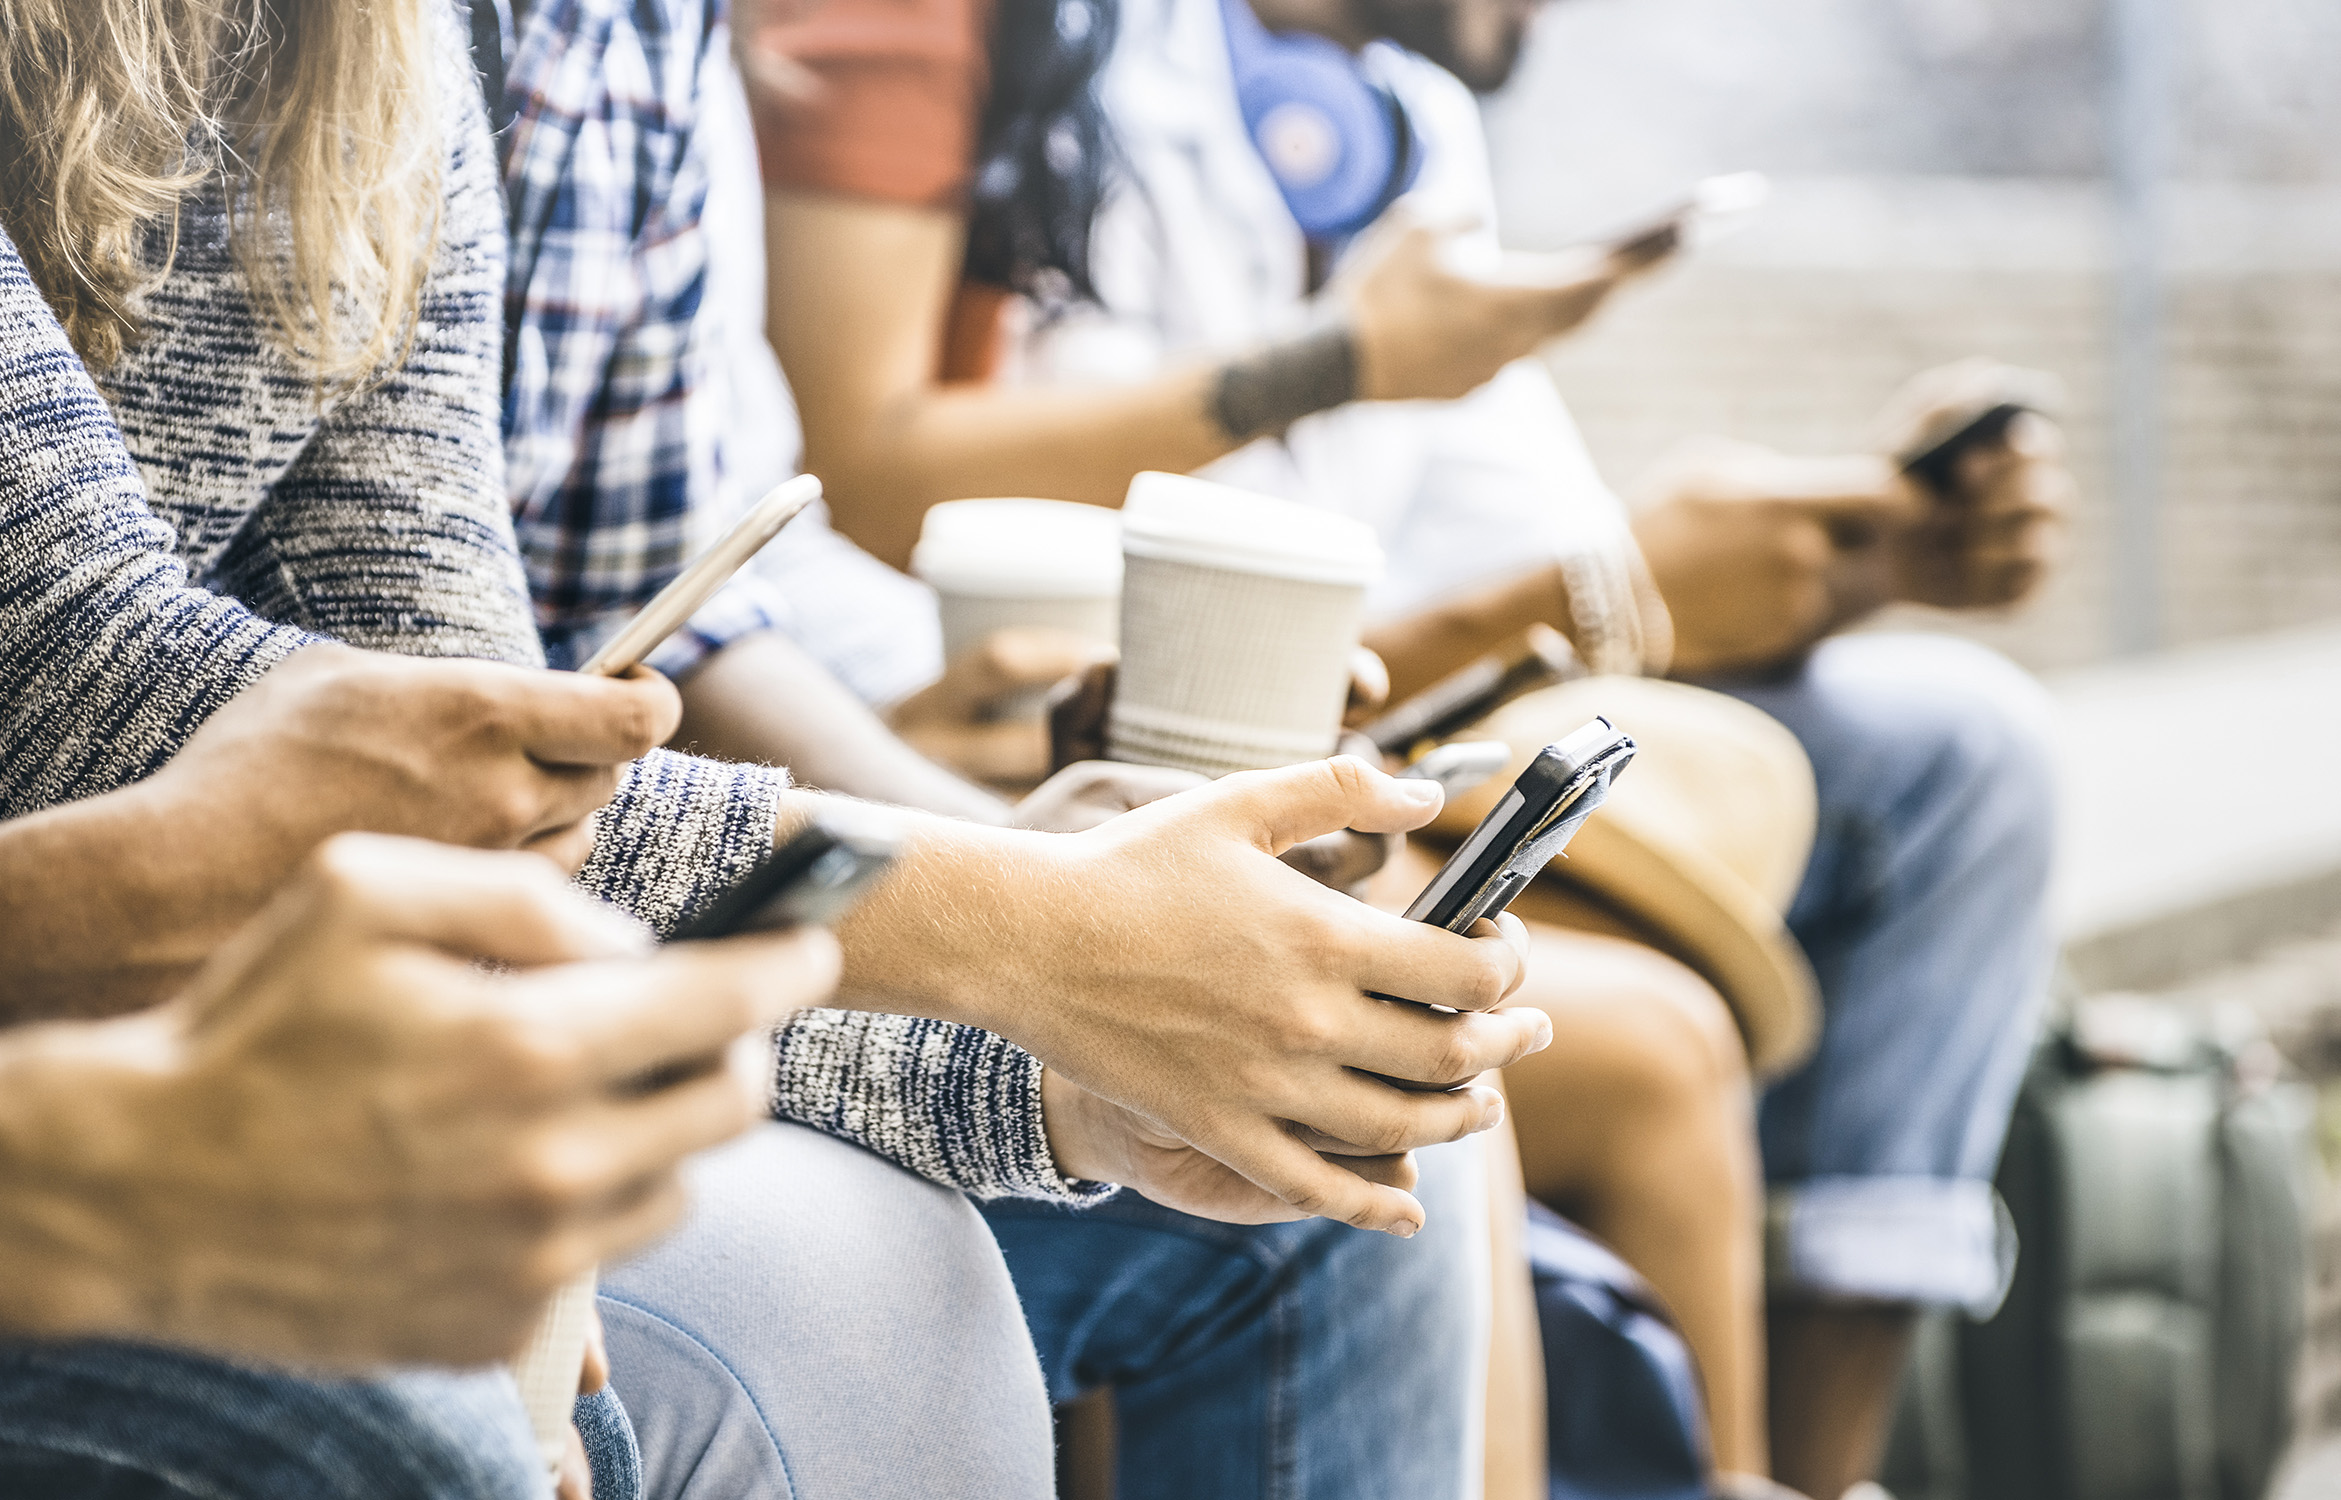 Group of college-aged students seated in a group using smartphones and holding coffee cups